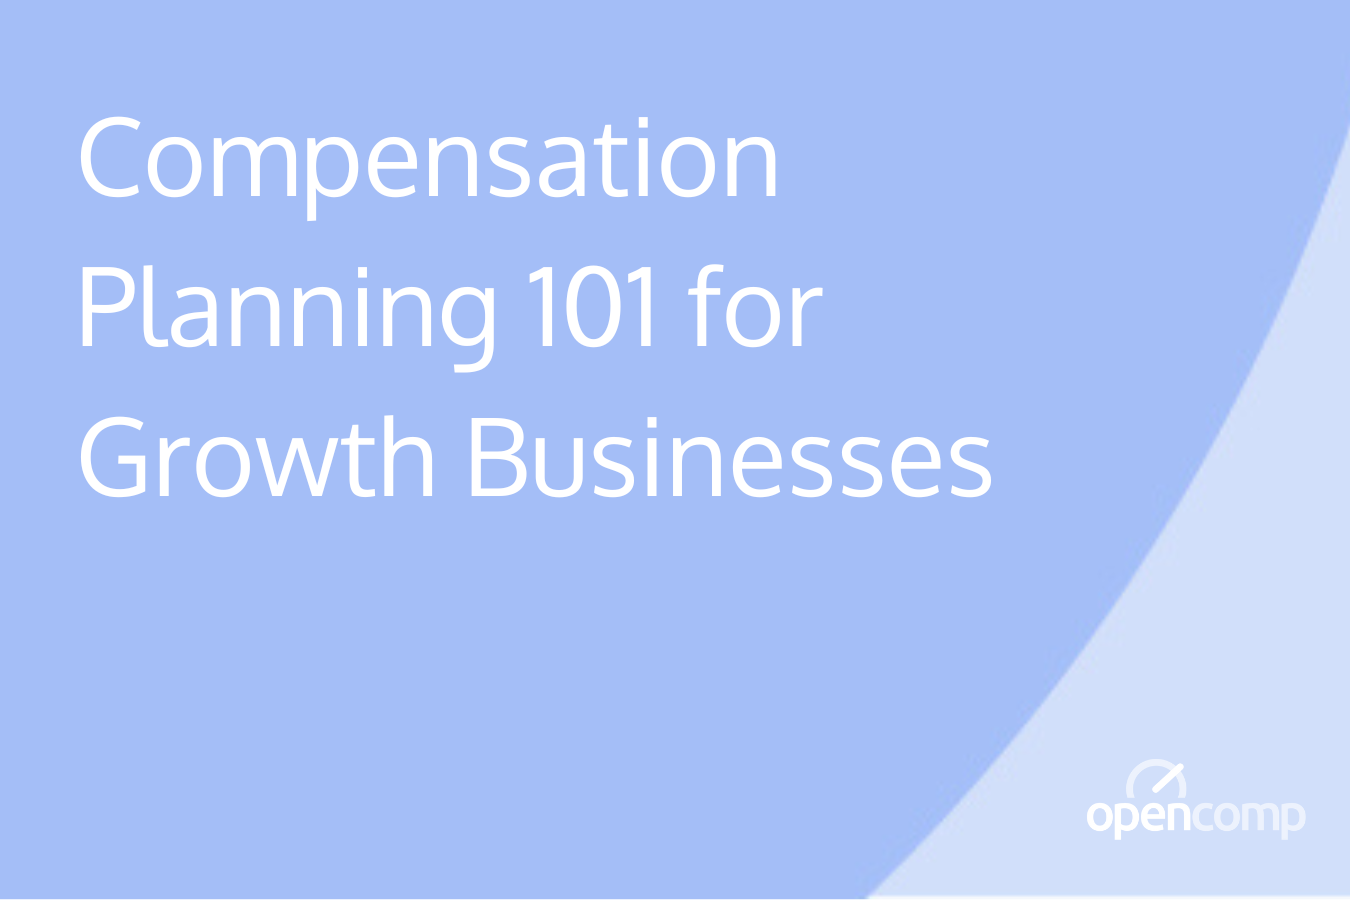 Compensation Planning 101 for Growth Businesses